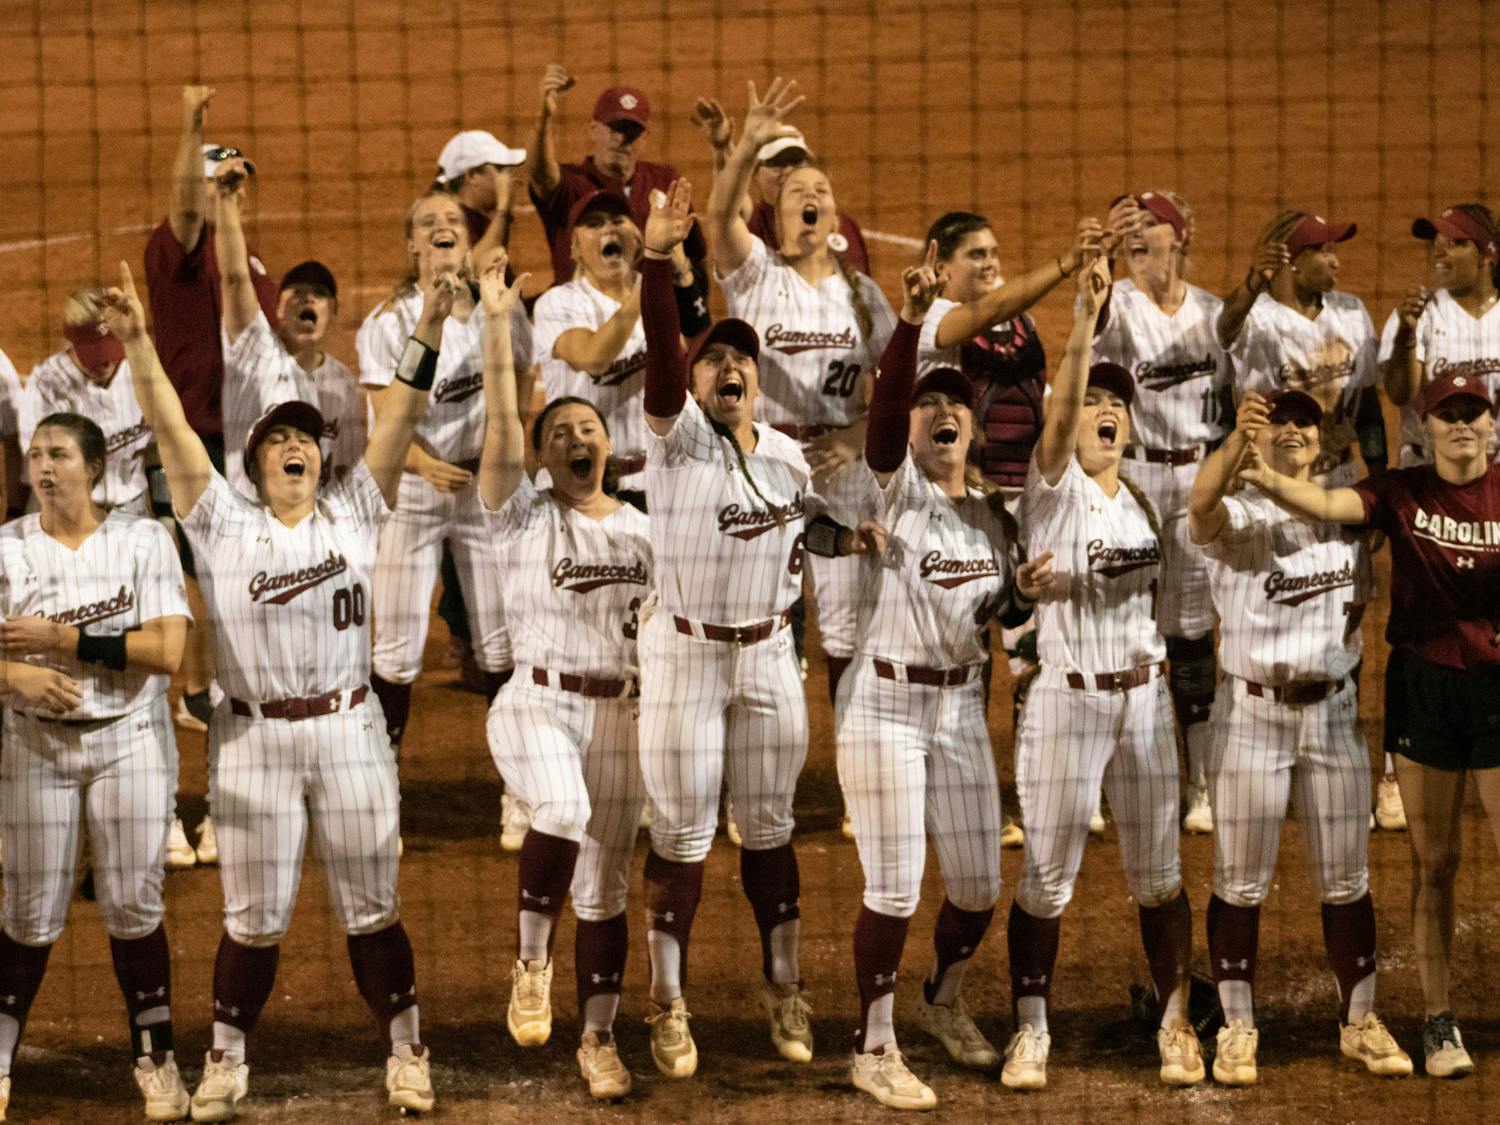 Members of the Gamecock softball team celebrate their comeback victory against Florida on March 31, 2023, at Beckham Field. The Gamecocks beat the Gators 13-10, winning the first game in the series.